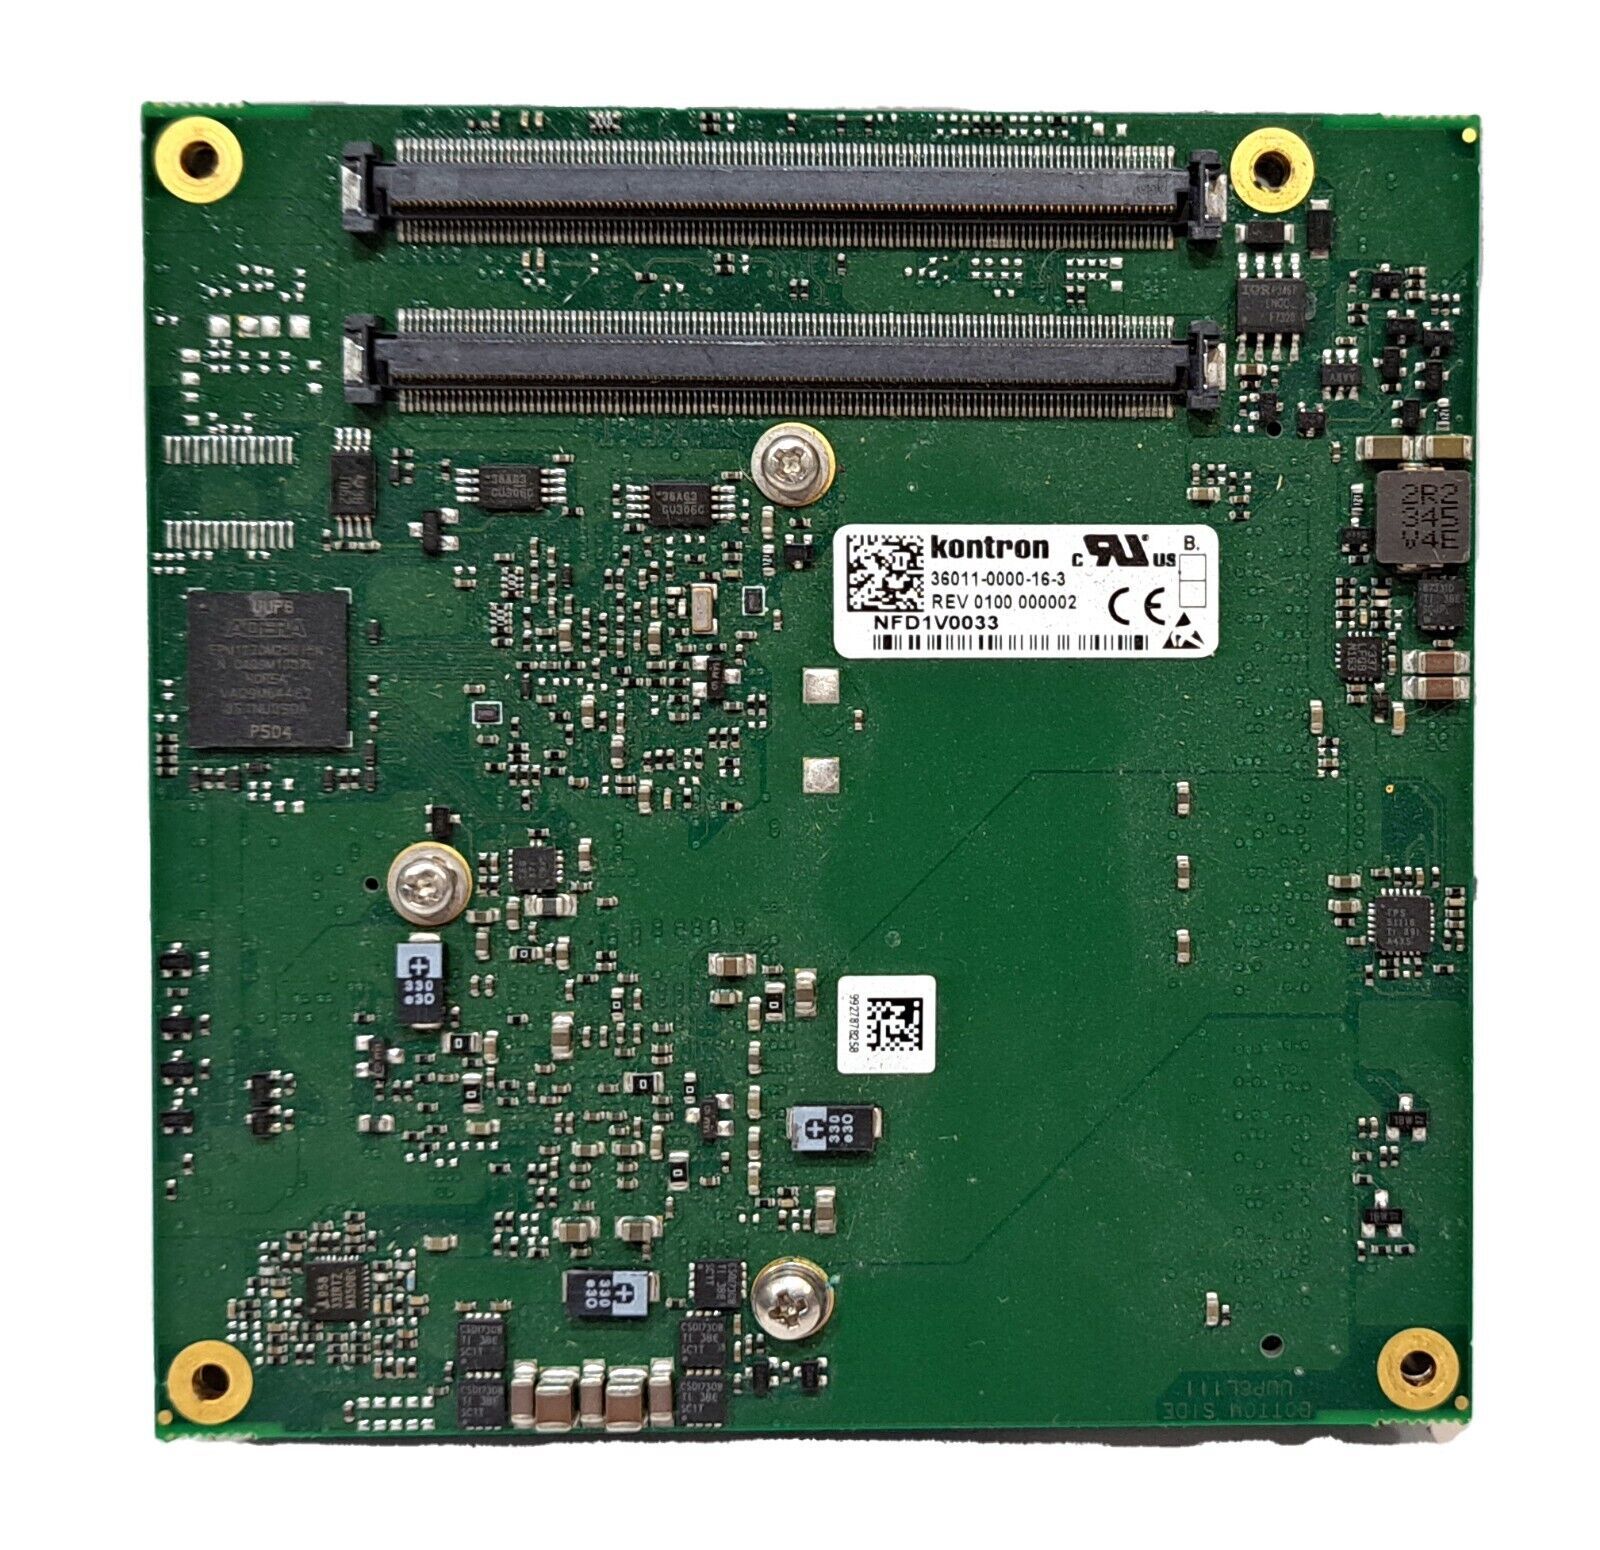 Primary image for Kontron COMe-cCT6 N2600 SER, 36011-0000-16-3 Computer-On-Module